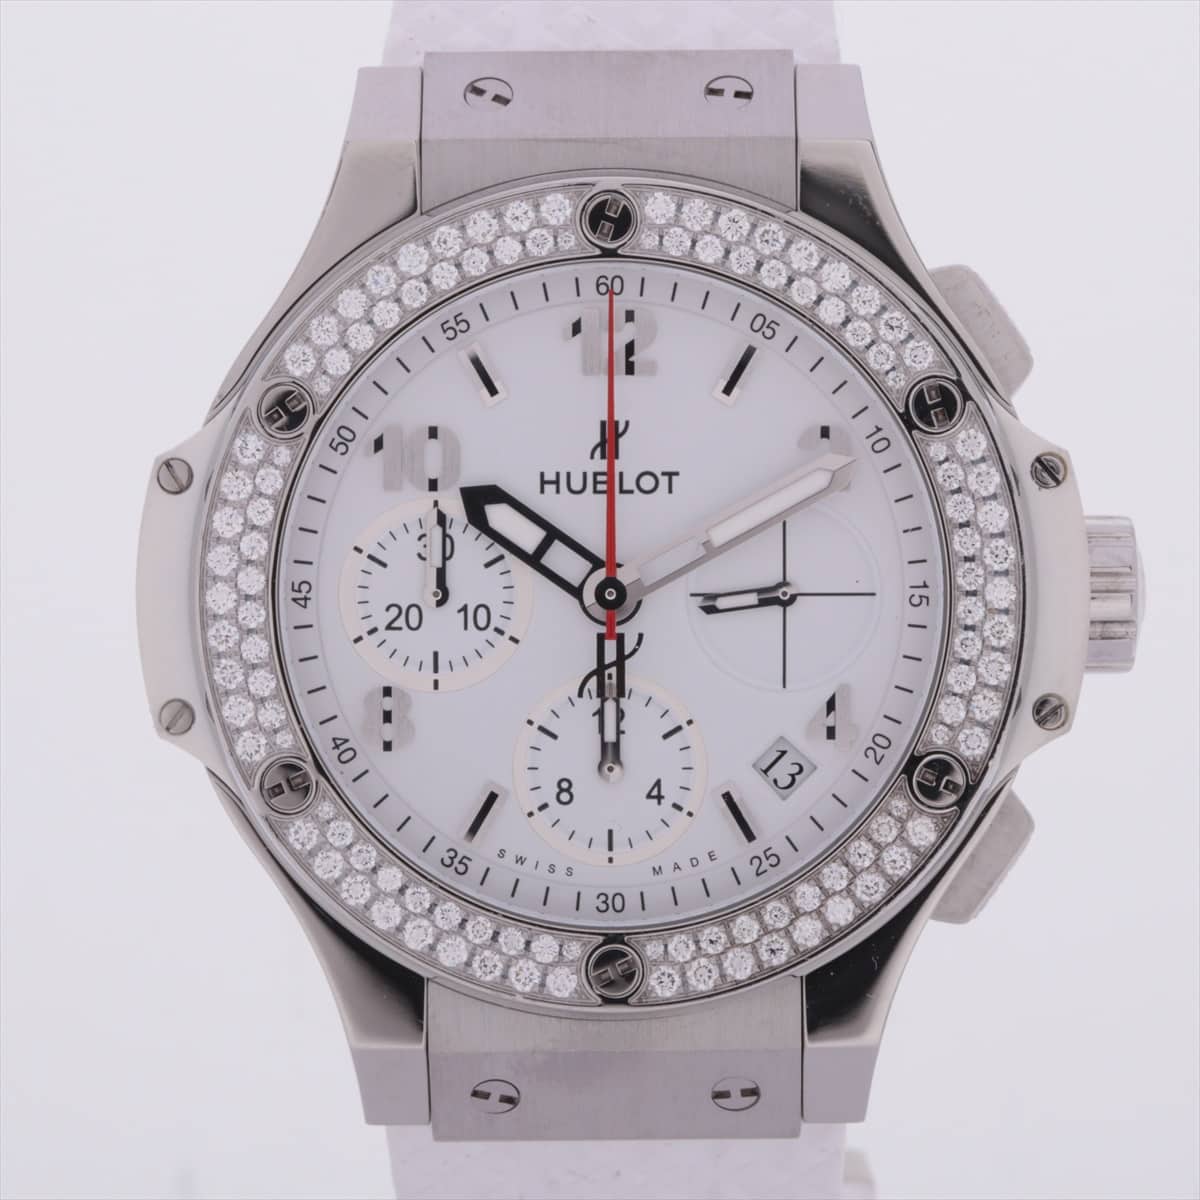 Hublot Big bang 342.SE.230.RW.114 SS & rubber AT White-Face Watch strap with a scent of perfume